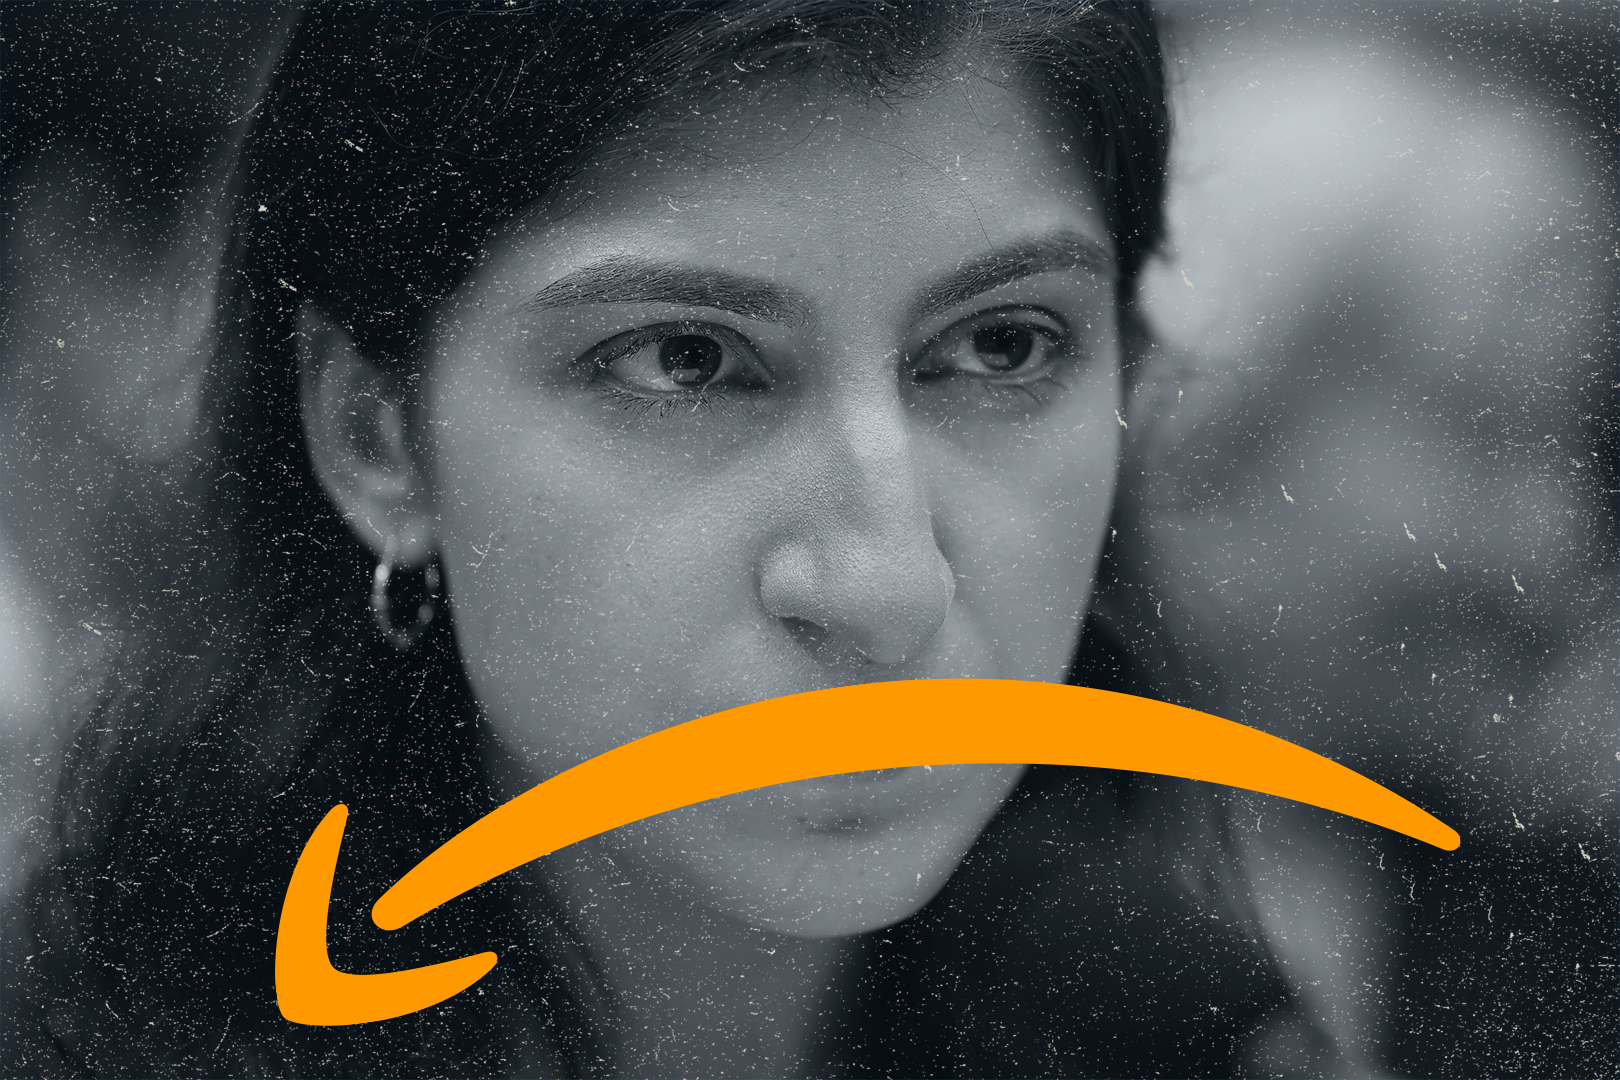 FTC chair Lina Khan with Amazon’s smile logo superimposed upside down over her mouth.